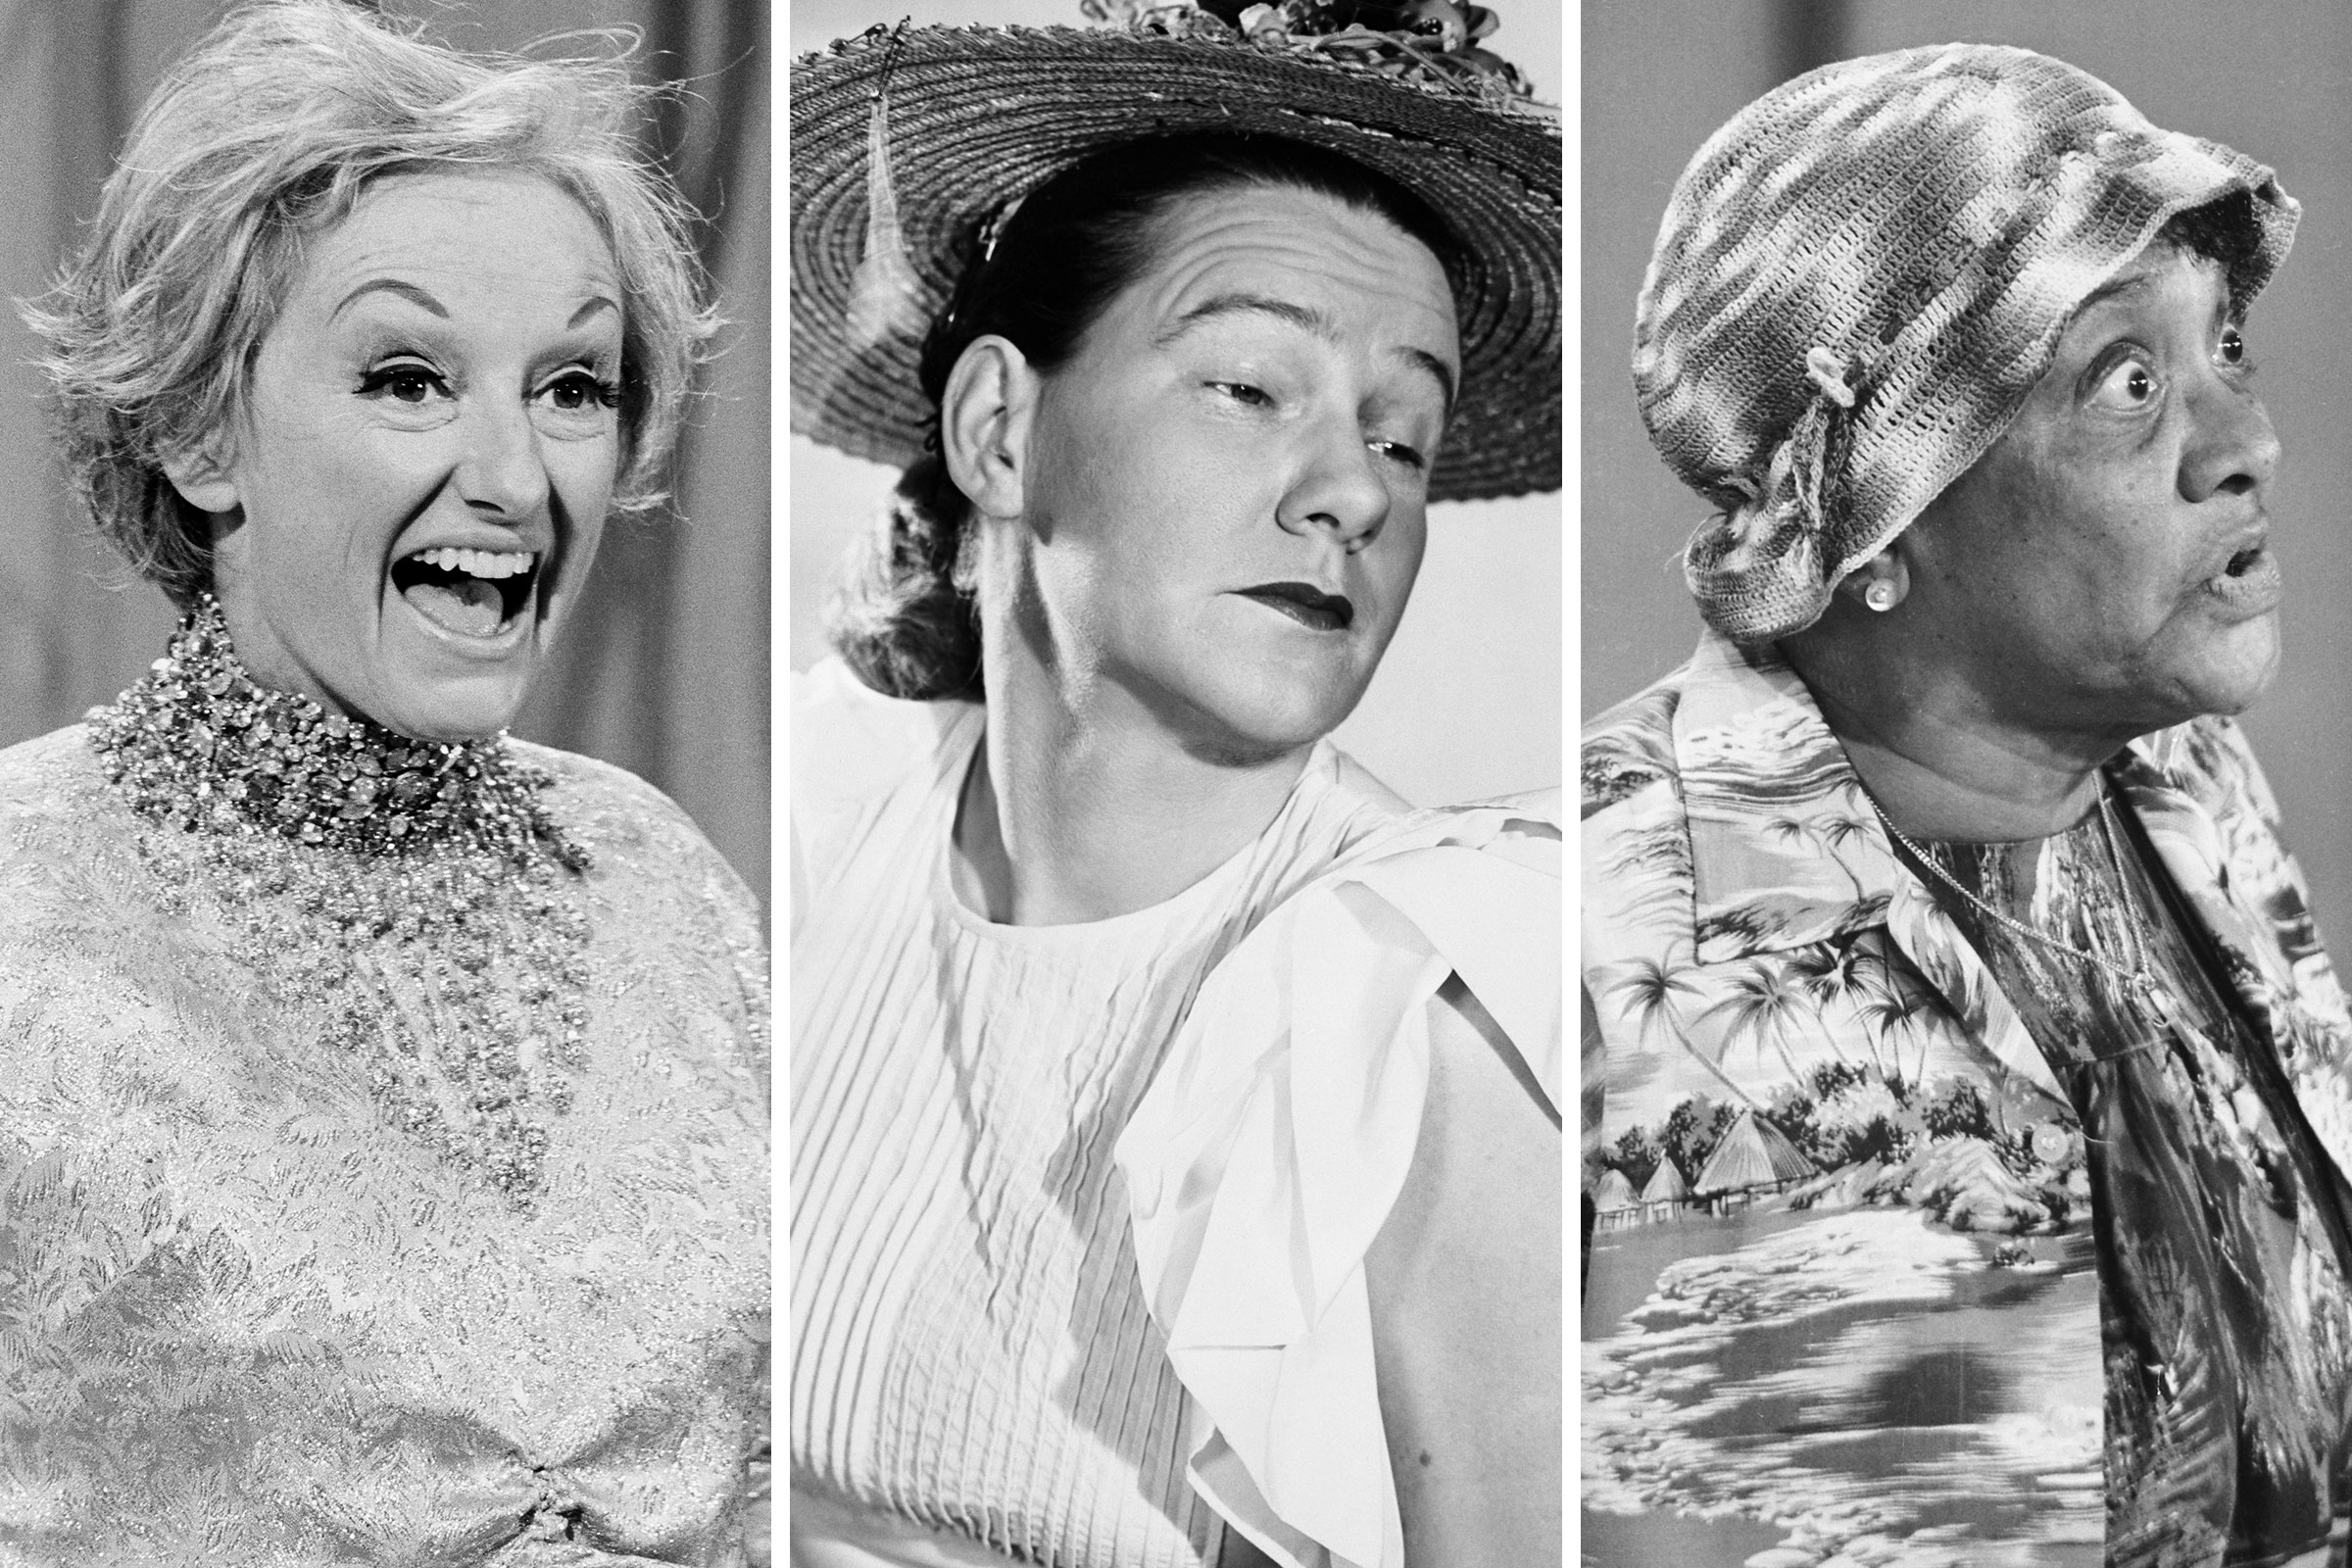 The Women Who Changed The Face of Comedy